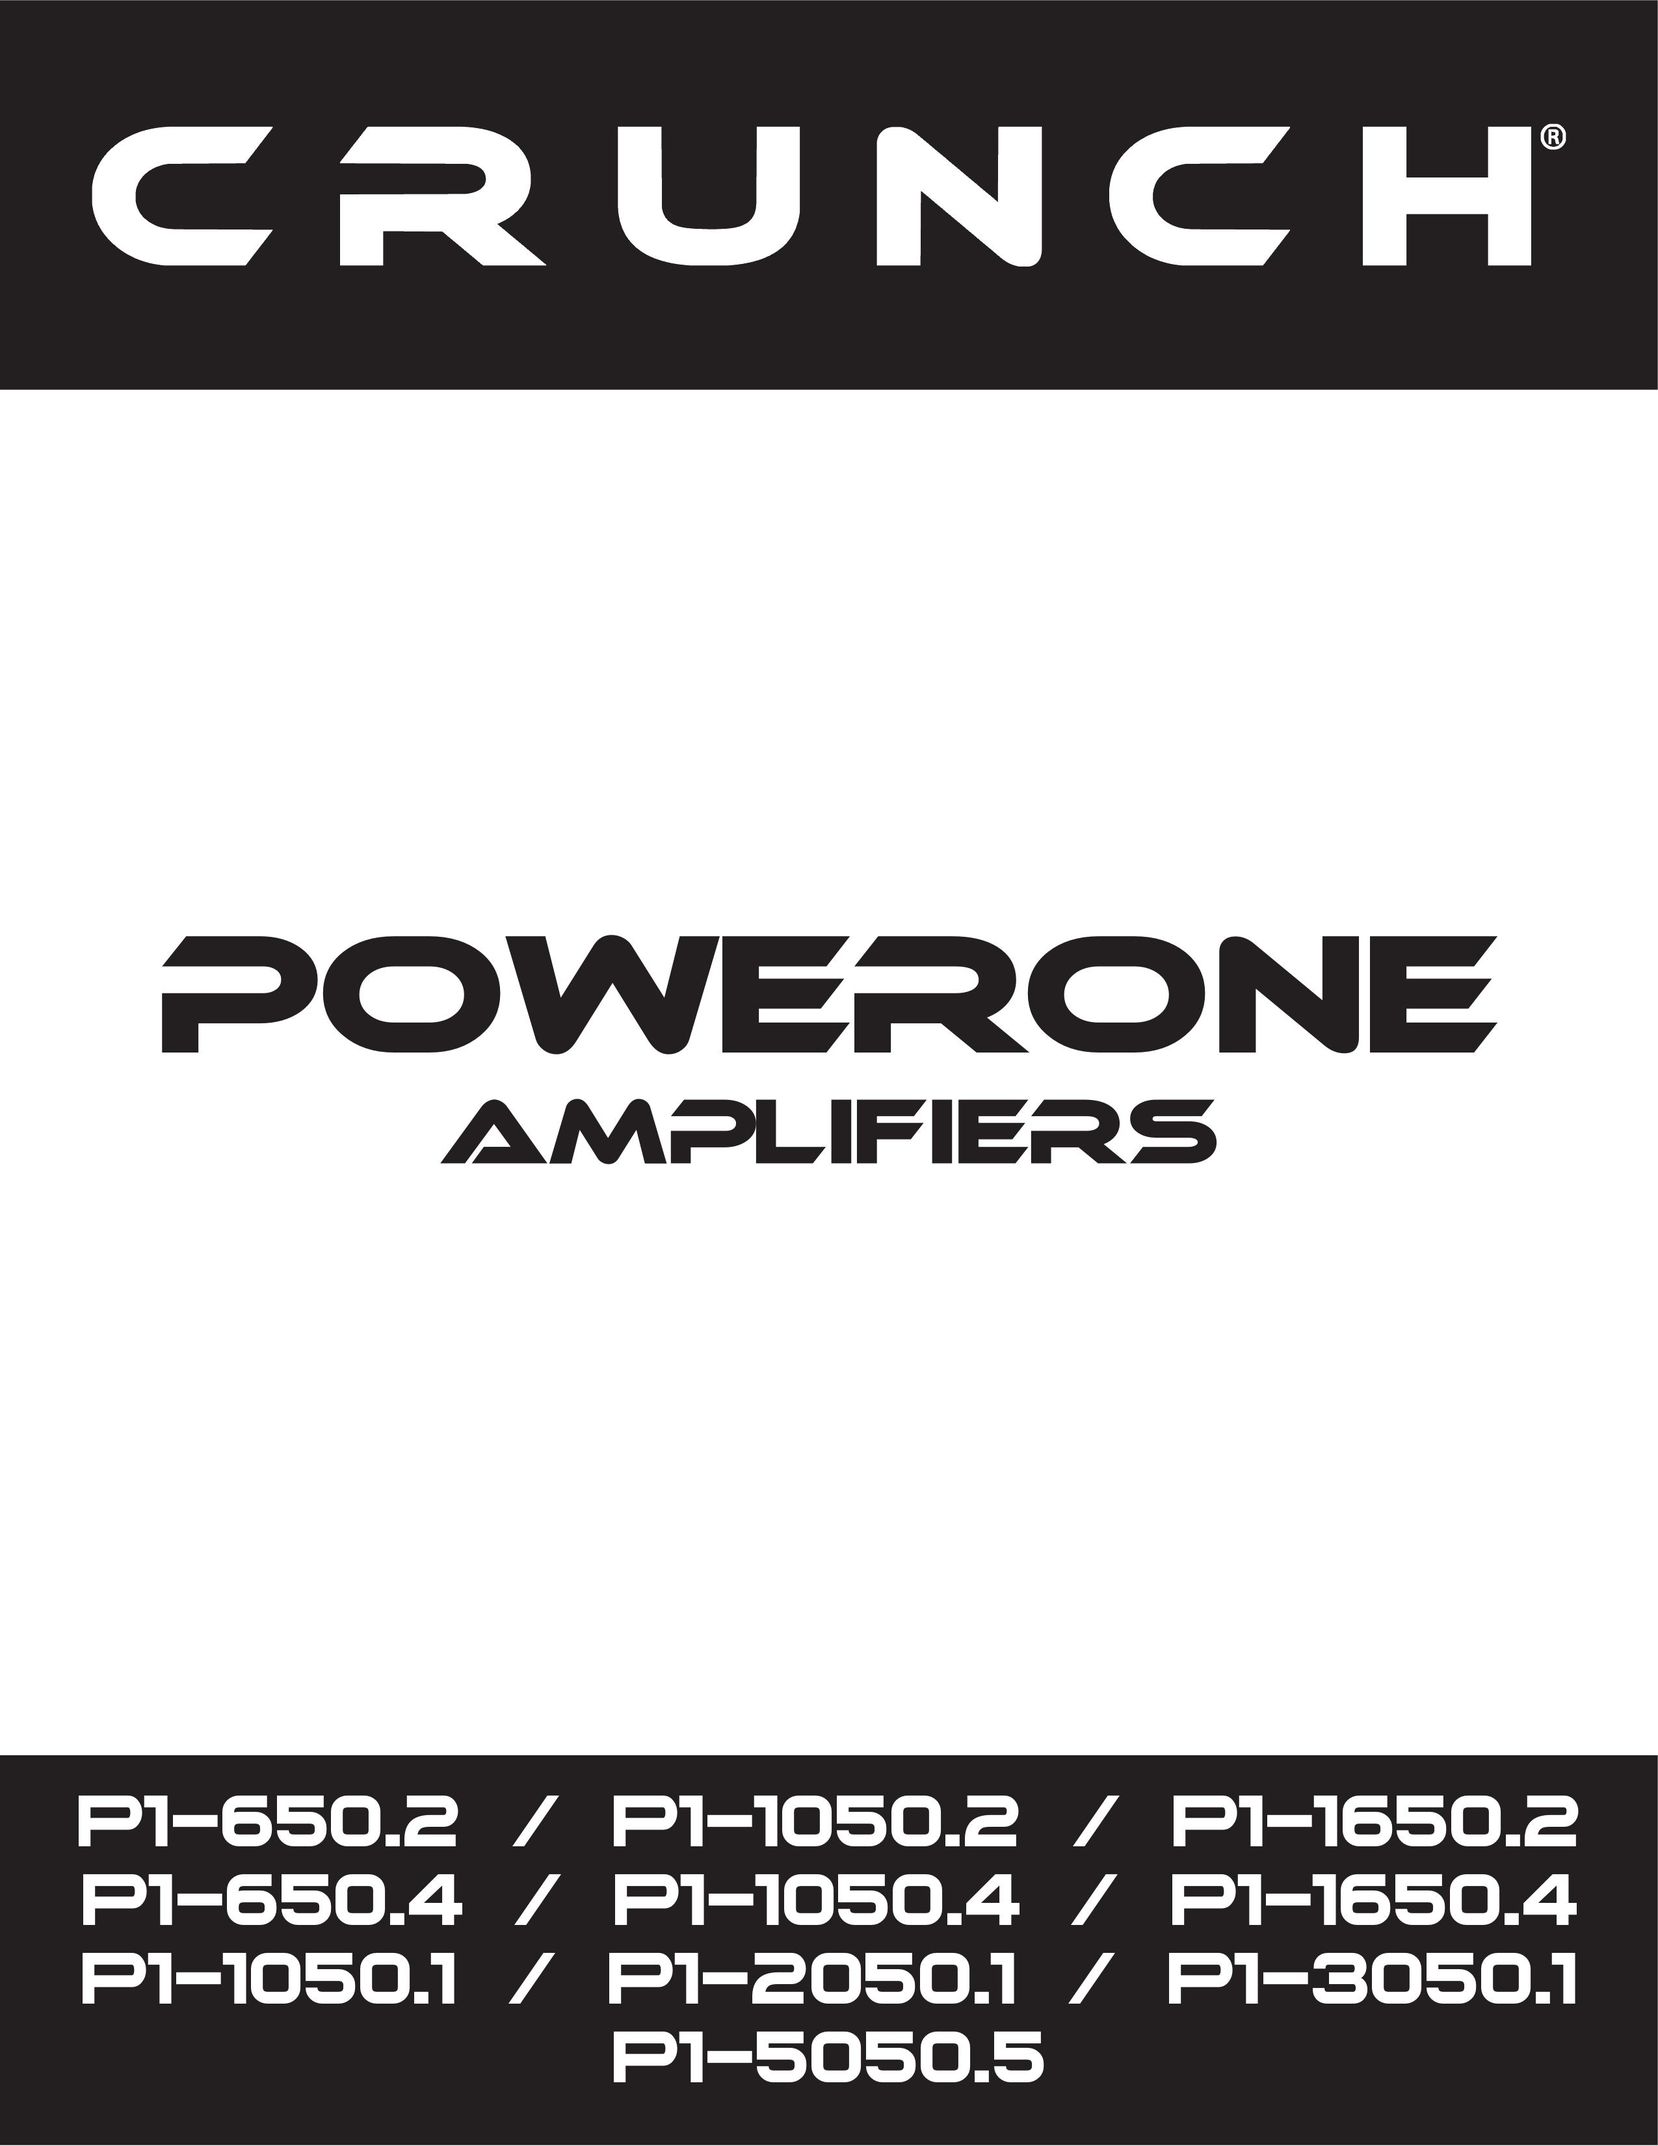 Crunch P1-650.4 Stereo Amplifier User Manual